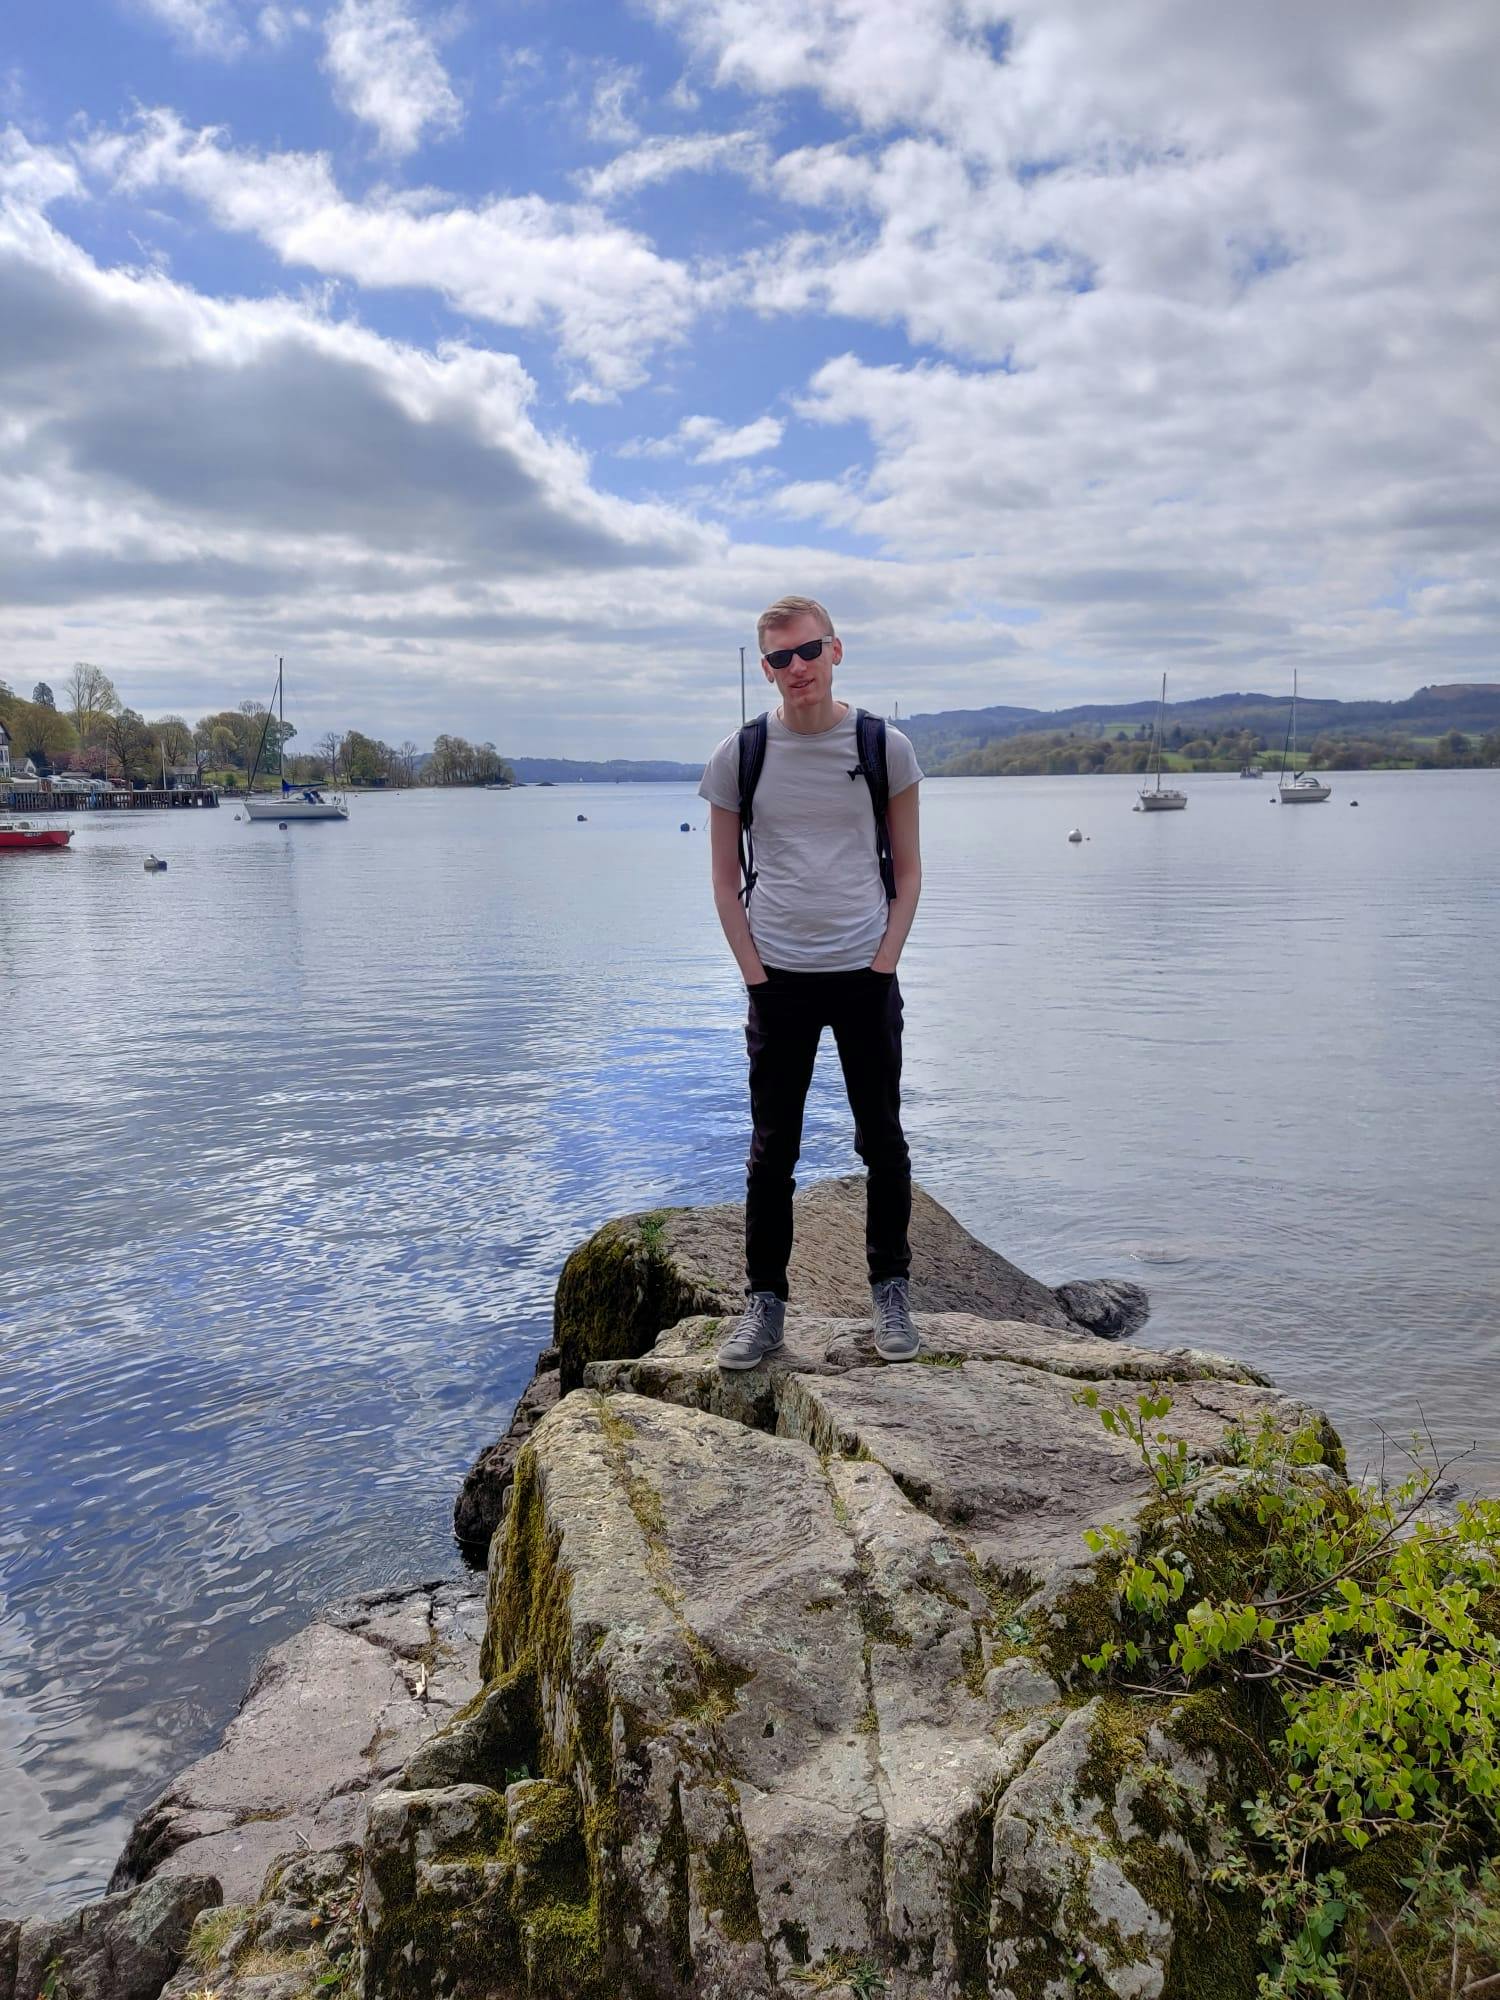 Me stood in front of Windemere in the Lake District